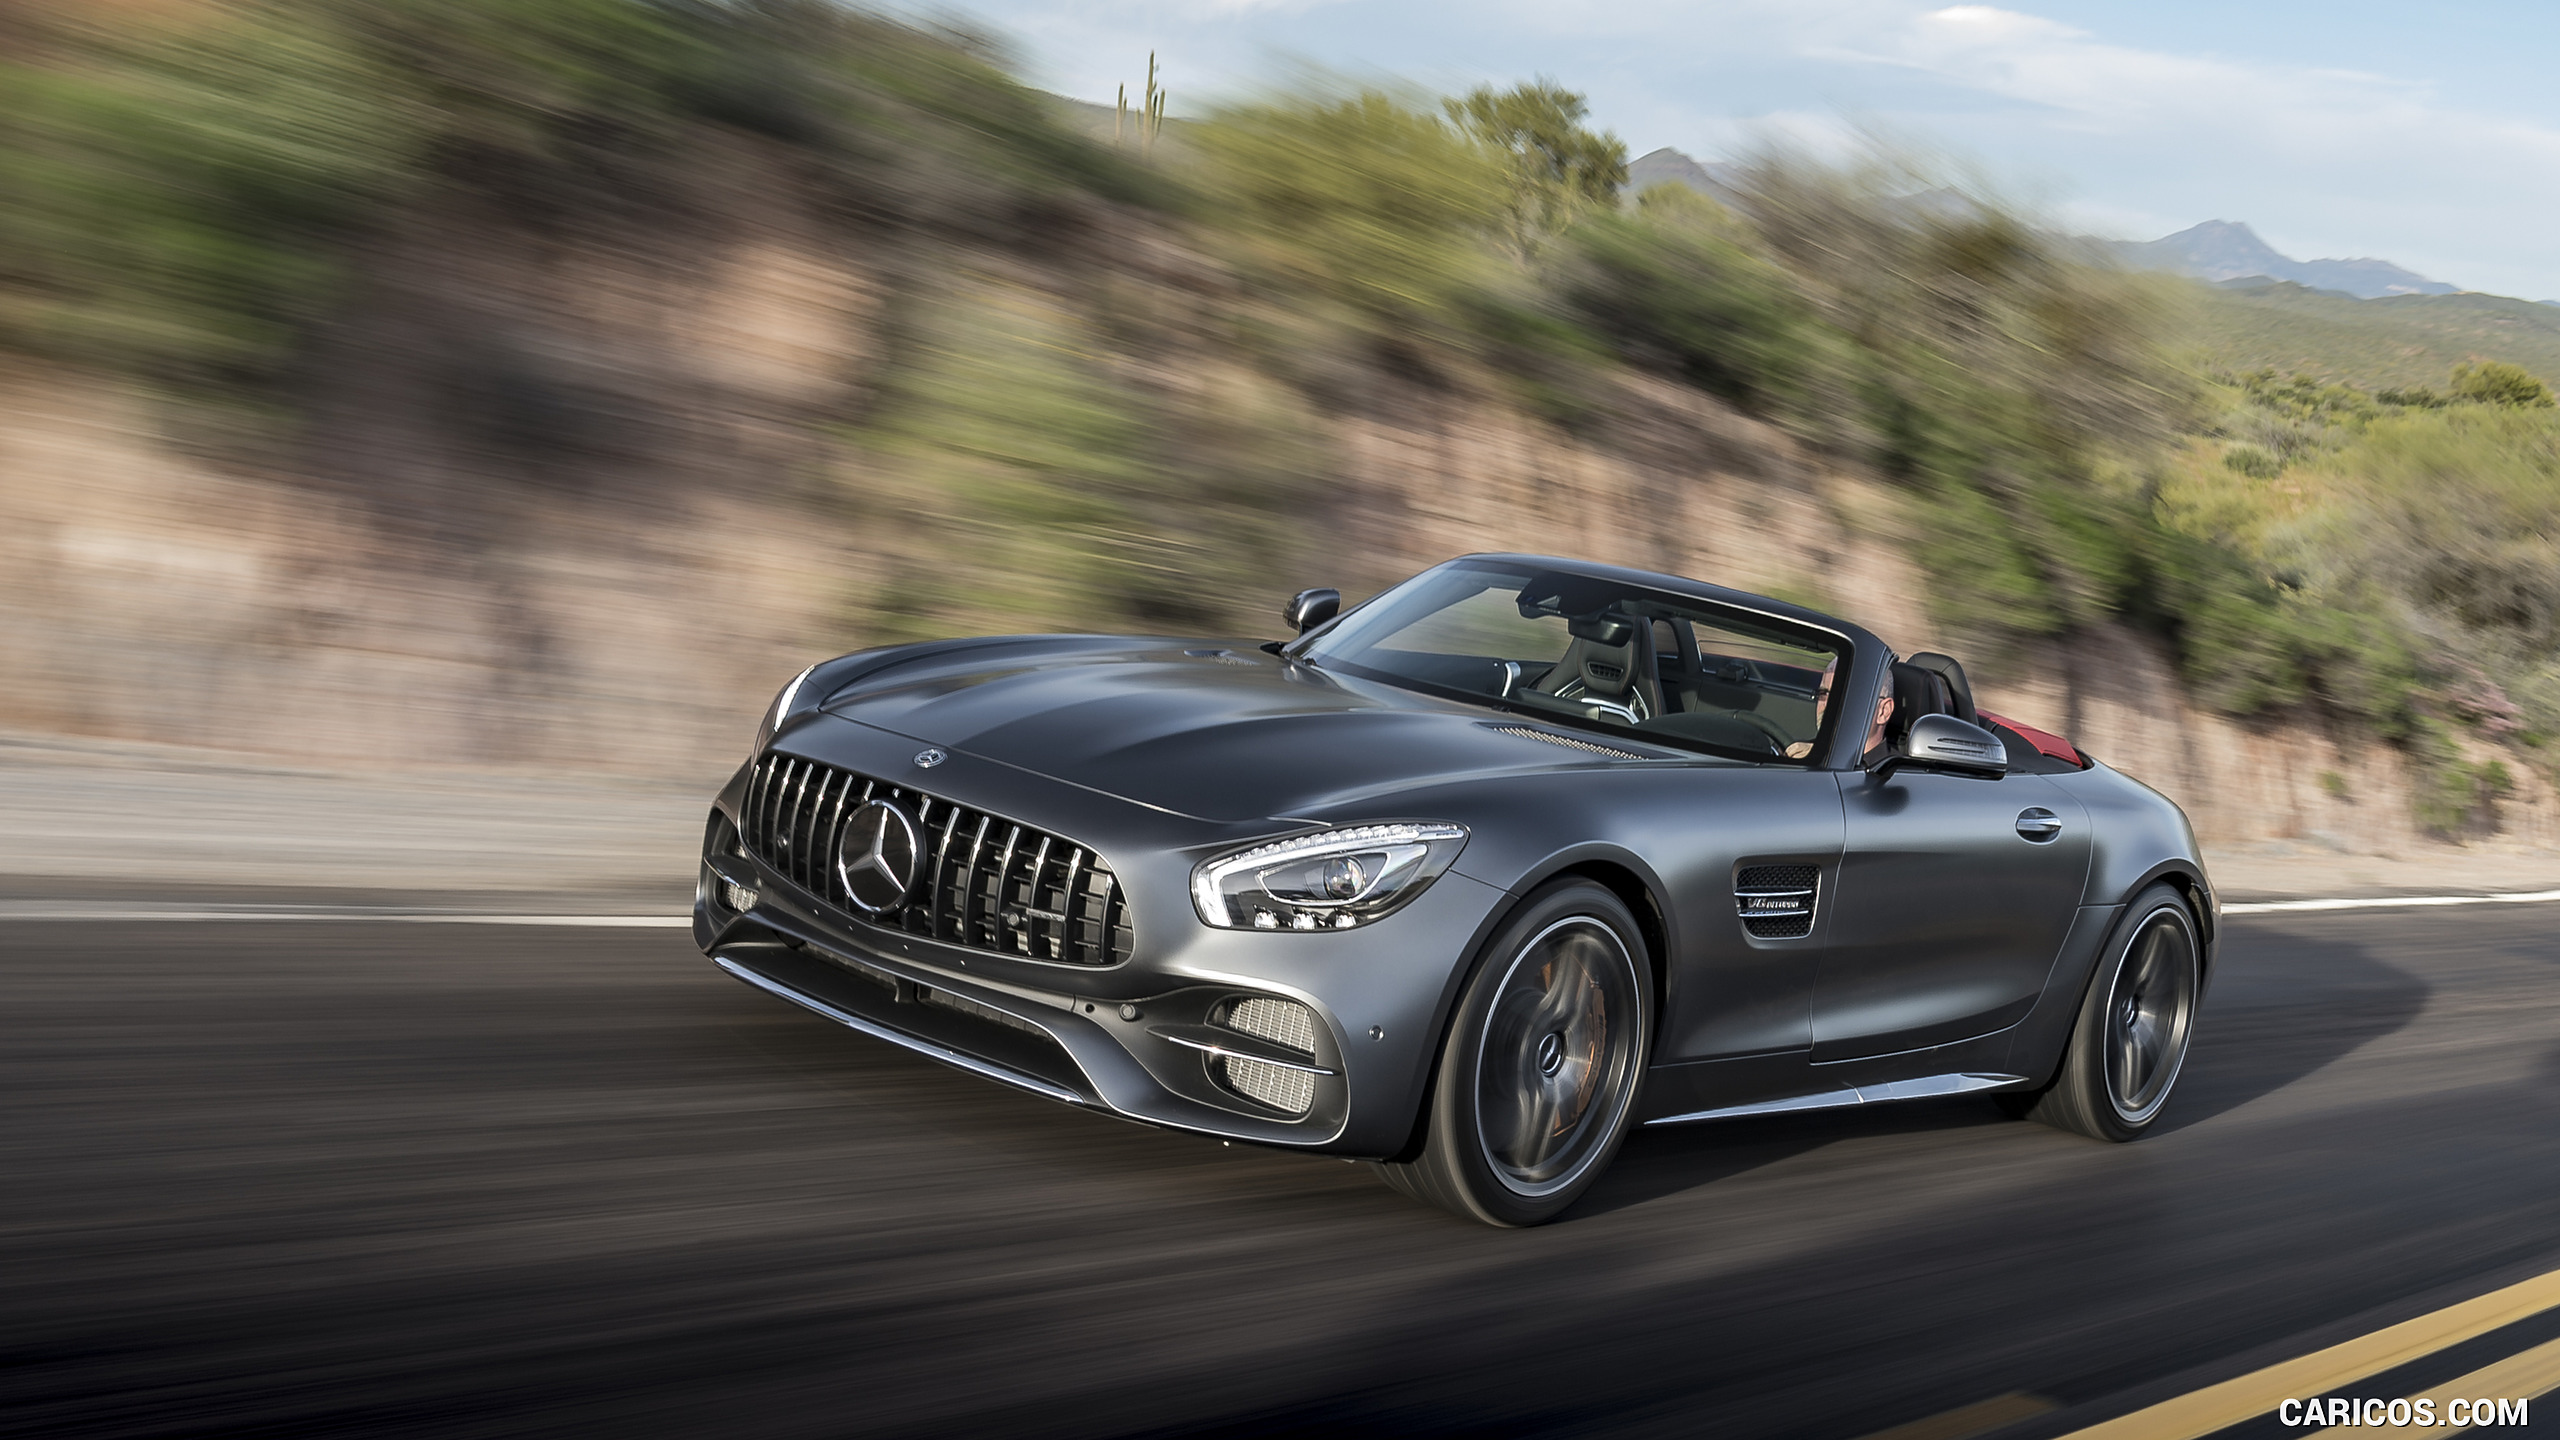 2018 Mercedes-AMG GT C Roadster - Front Three-Quarter, #295 of 350